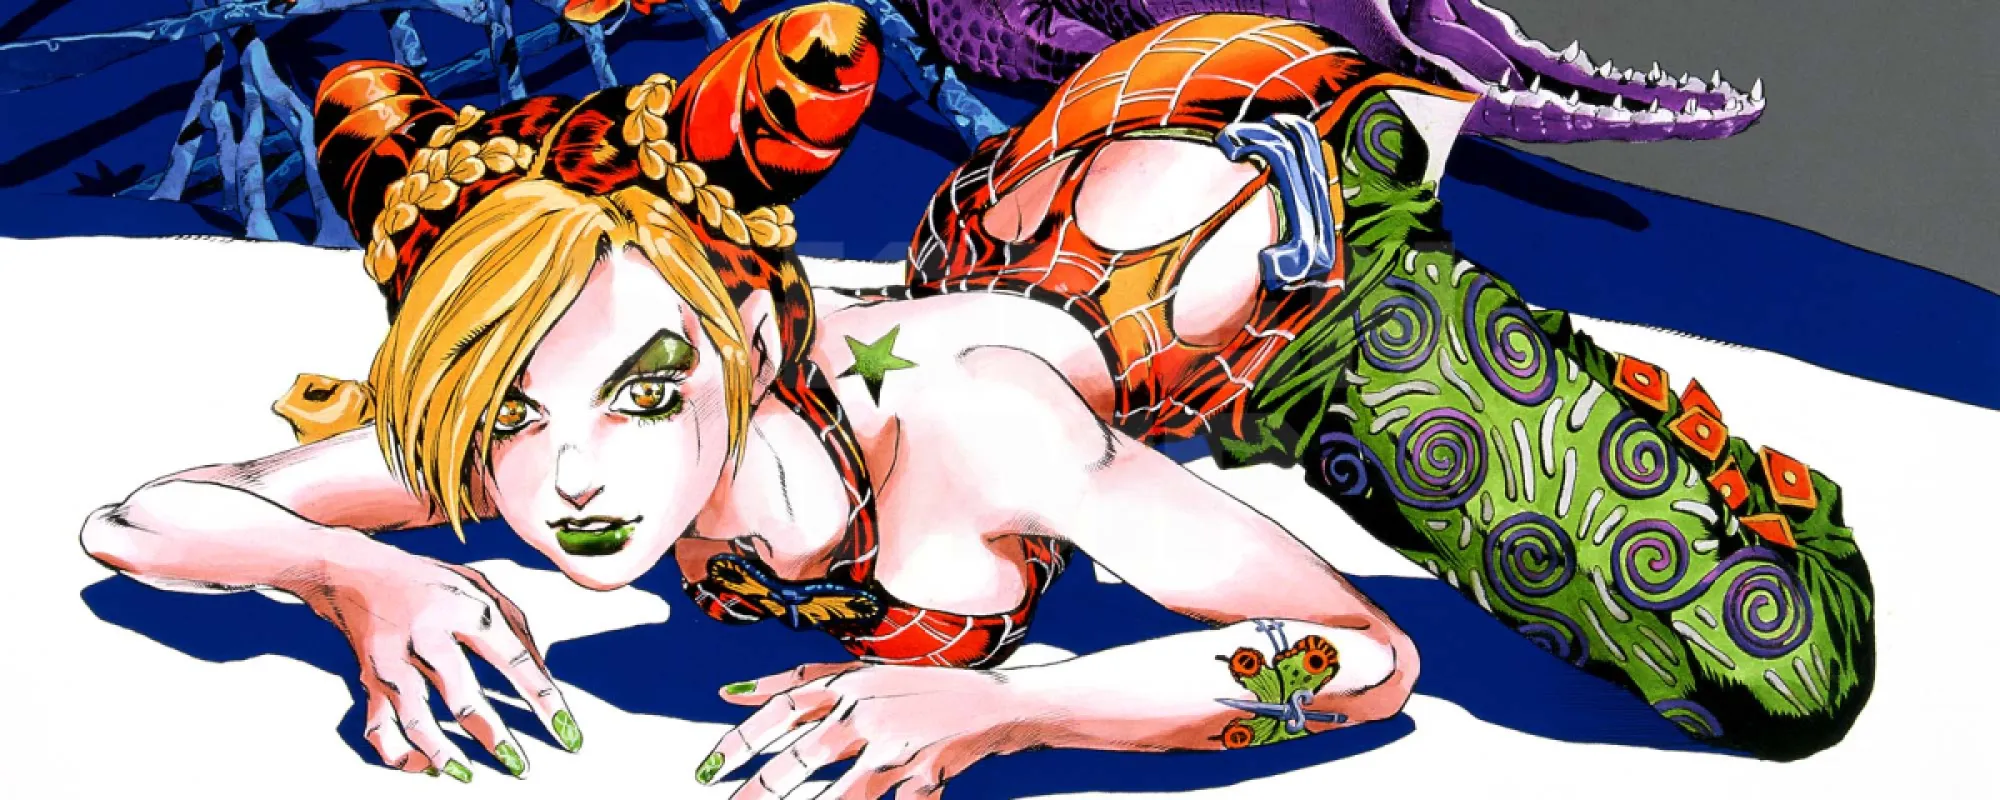 Jolyne in a panel from the manga 